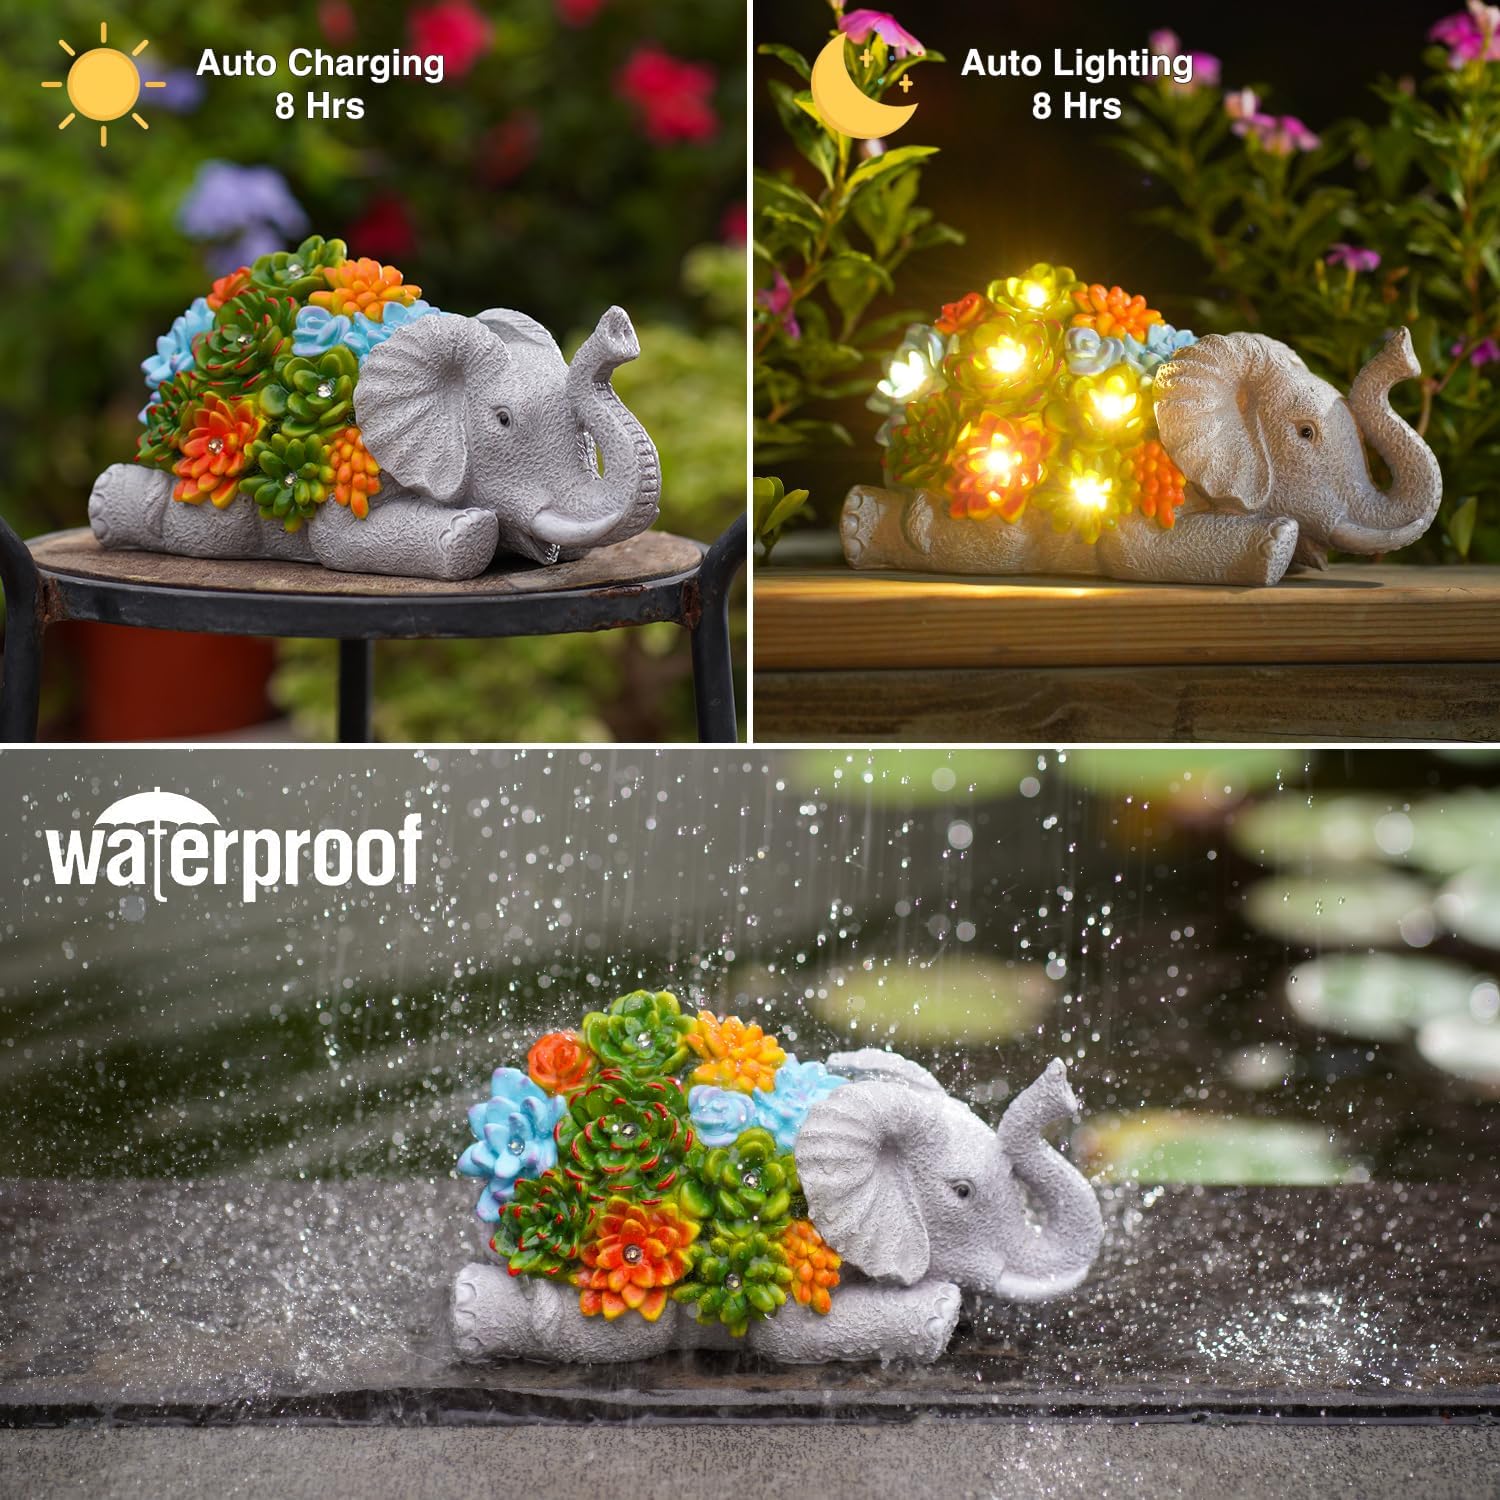 Elephant Statue Solar Garden Ornaments Outdoor Decor Waterproof Resin Elephant Figurines with Succulent 6 LED Solar Lights decoration for Home Yard Patio Lawn Elephant gifts for Women/Mum/Christmas 4